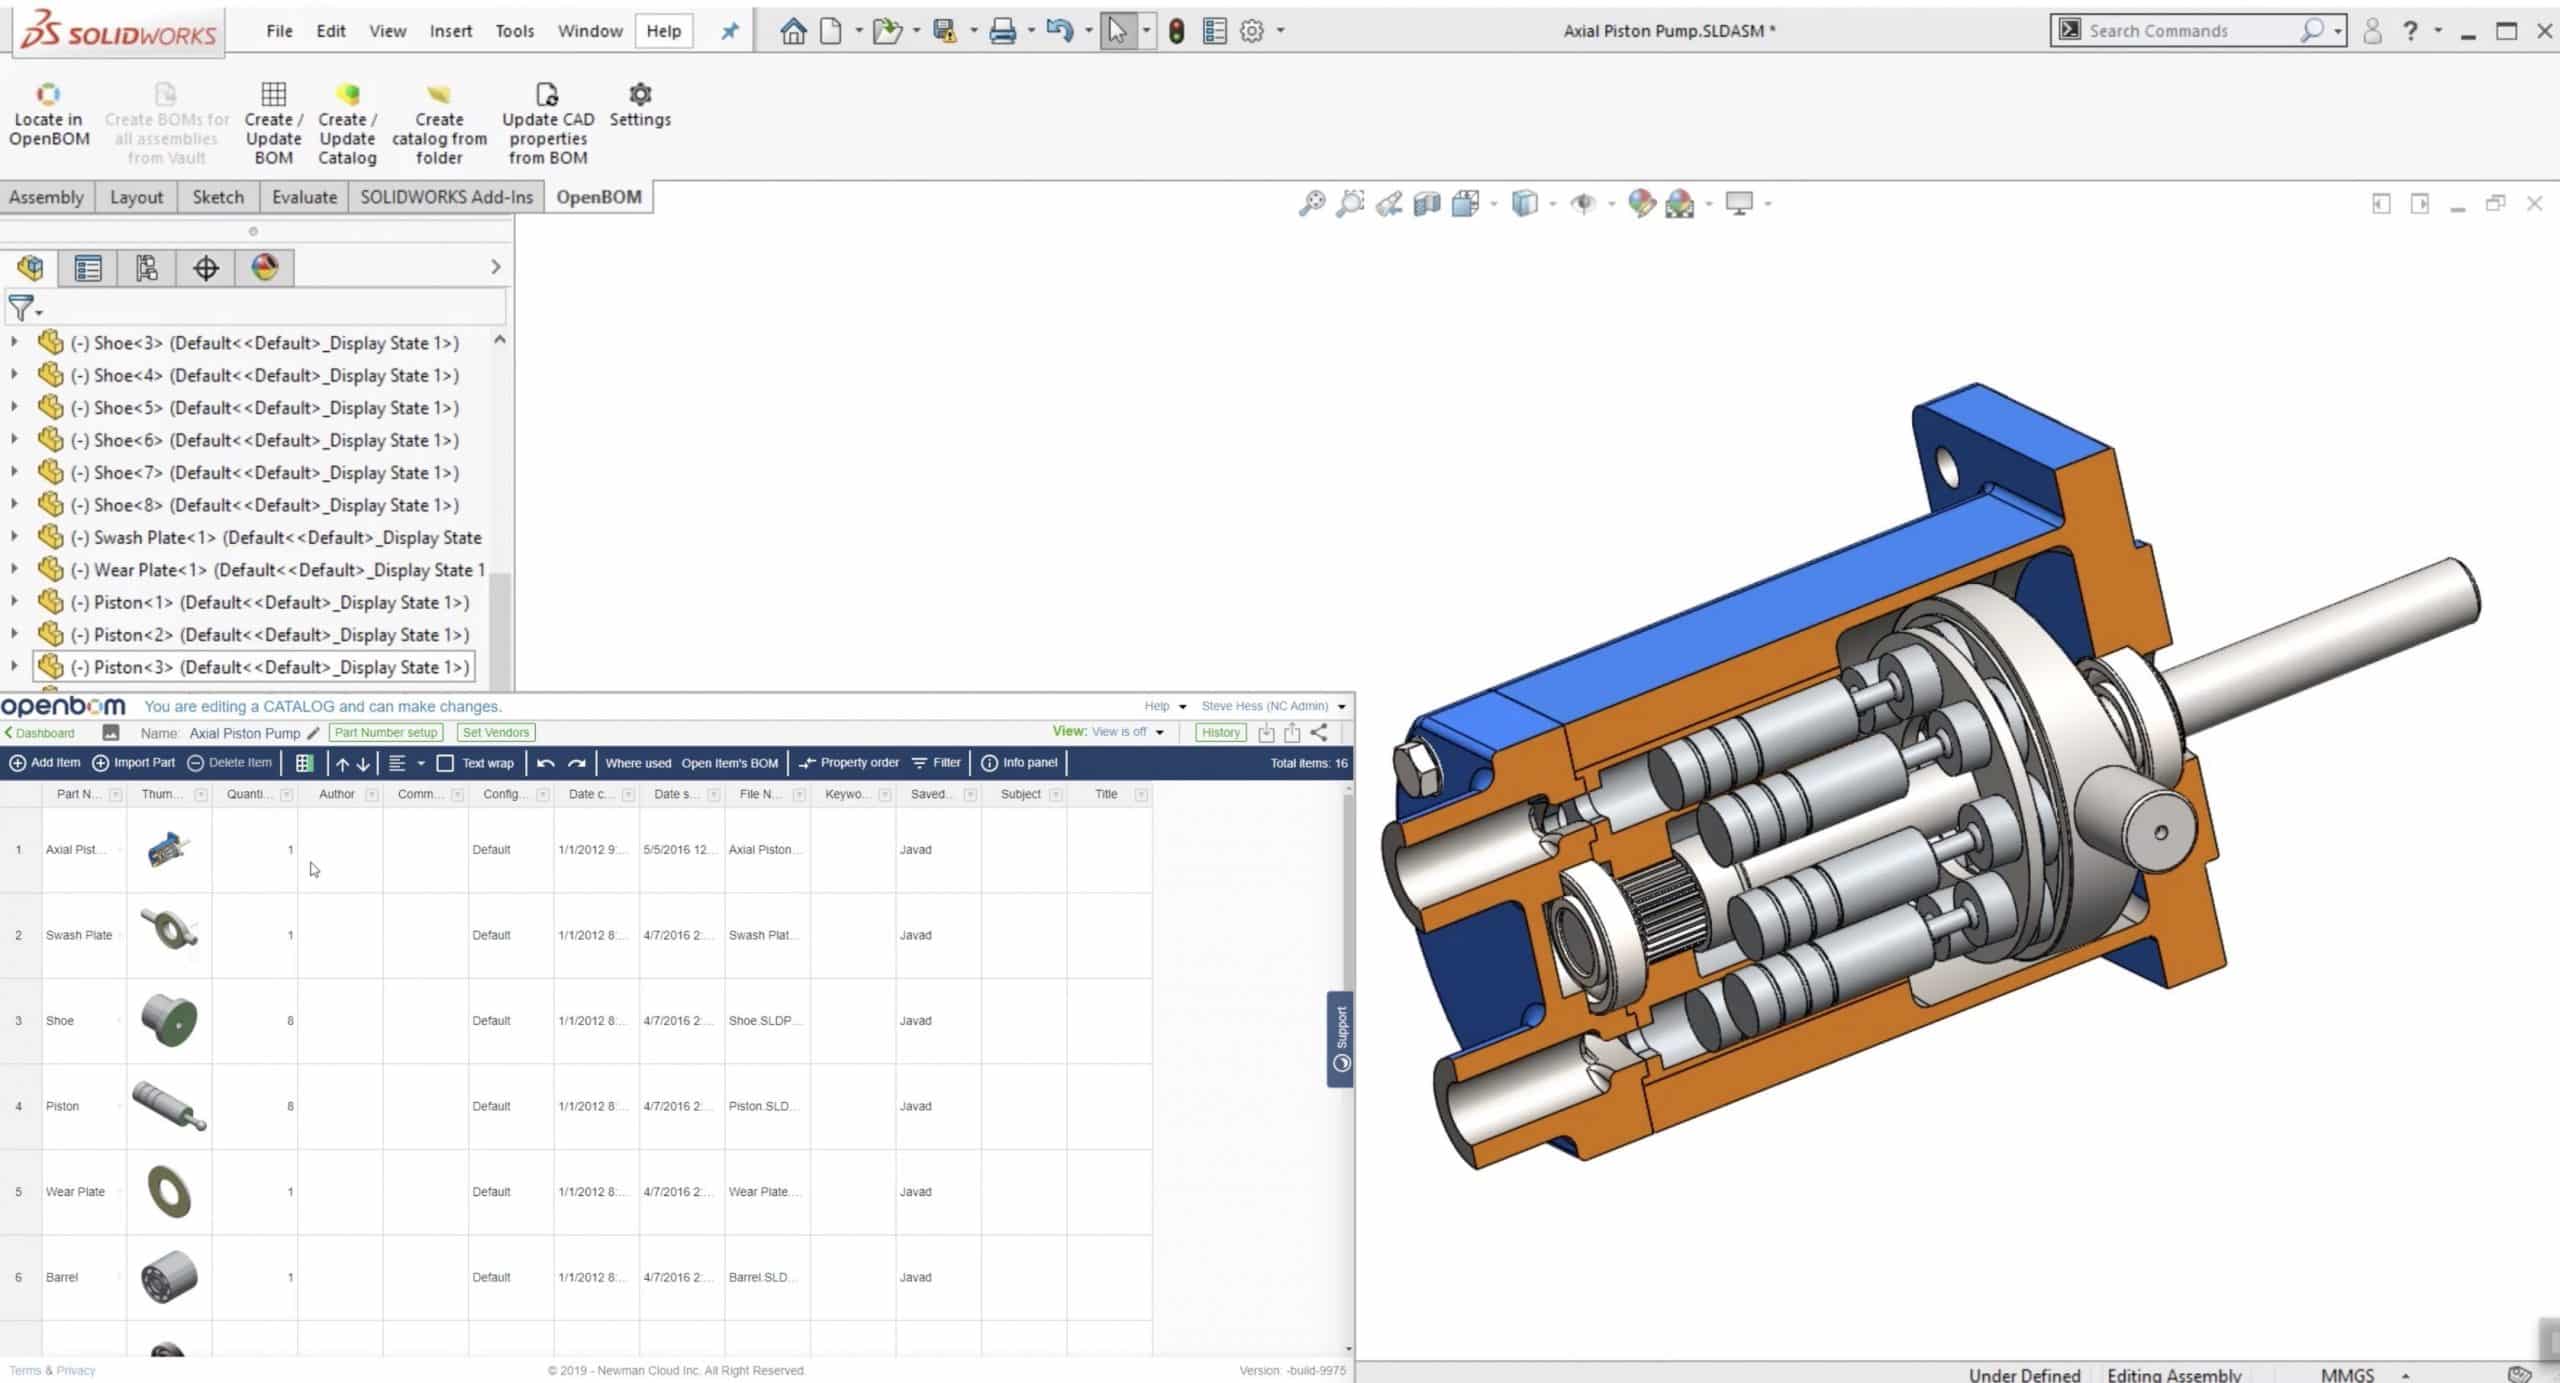 How to create SOLIDWORKS BOM (Bill of Materials) using OpenBOM Add-in